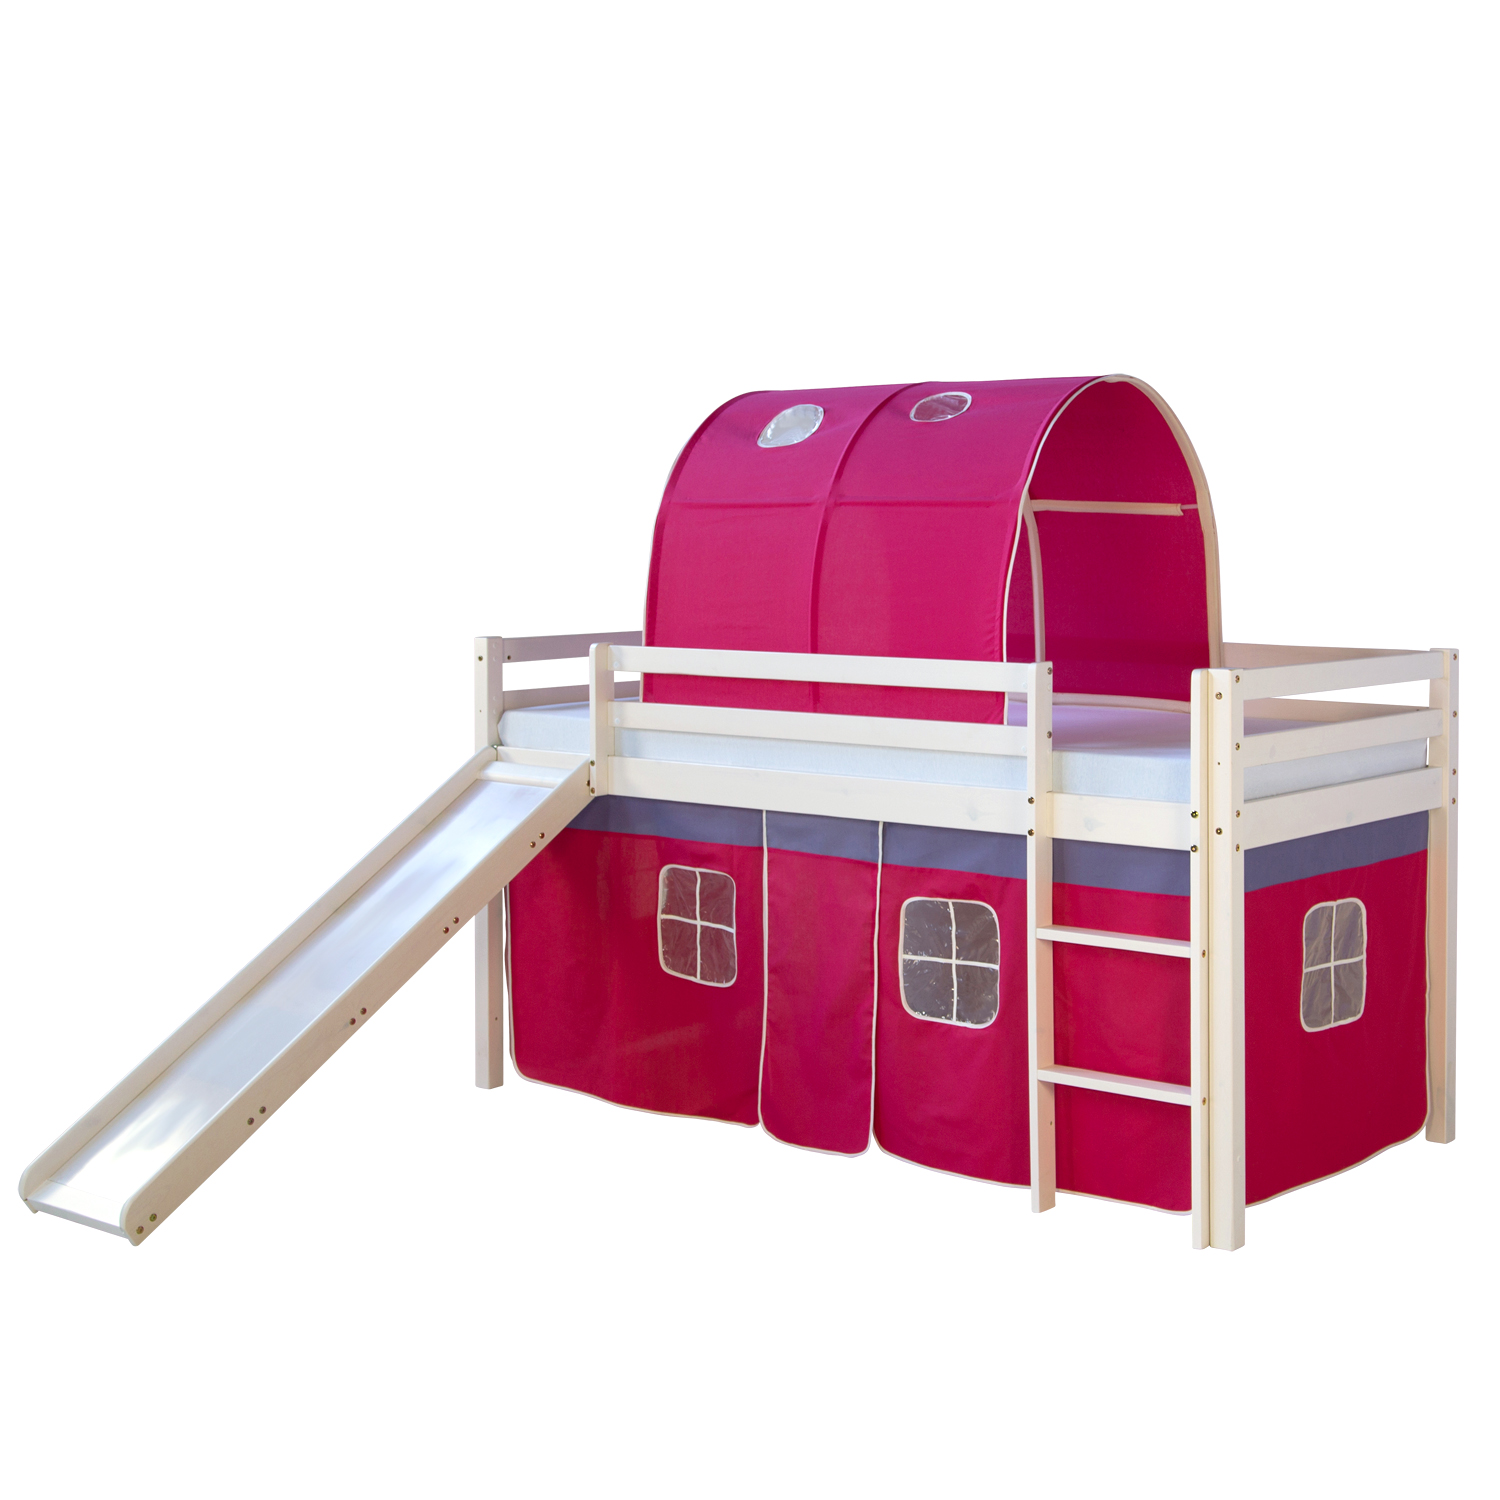 Loftbed with Slide 90x200 cm Slats Bunk bed Childrens bed Solid Pine Wood Curtain Tunnel Pink